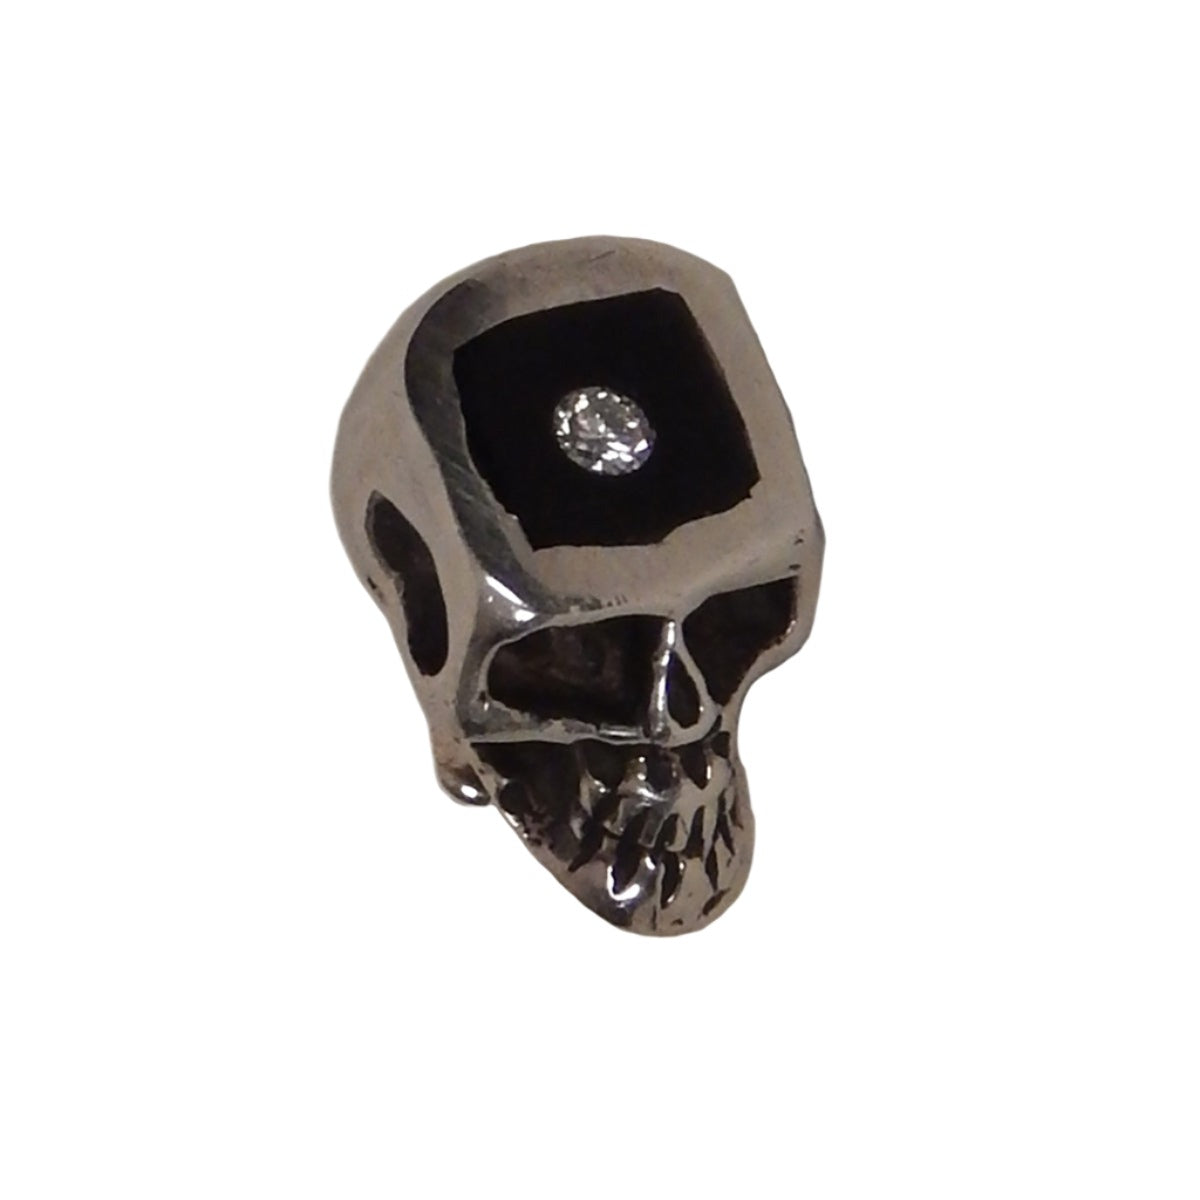 Los Angeles based Marcos, has designed this sterling silver skull tie pin with both an inlaid piece of black ebony wood as well as a bright white diamond accent.